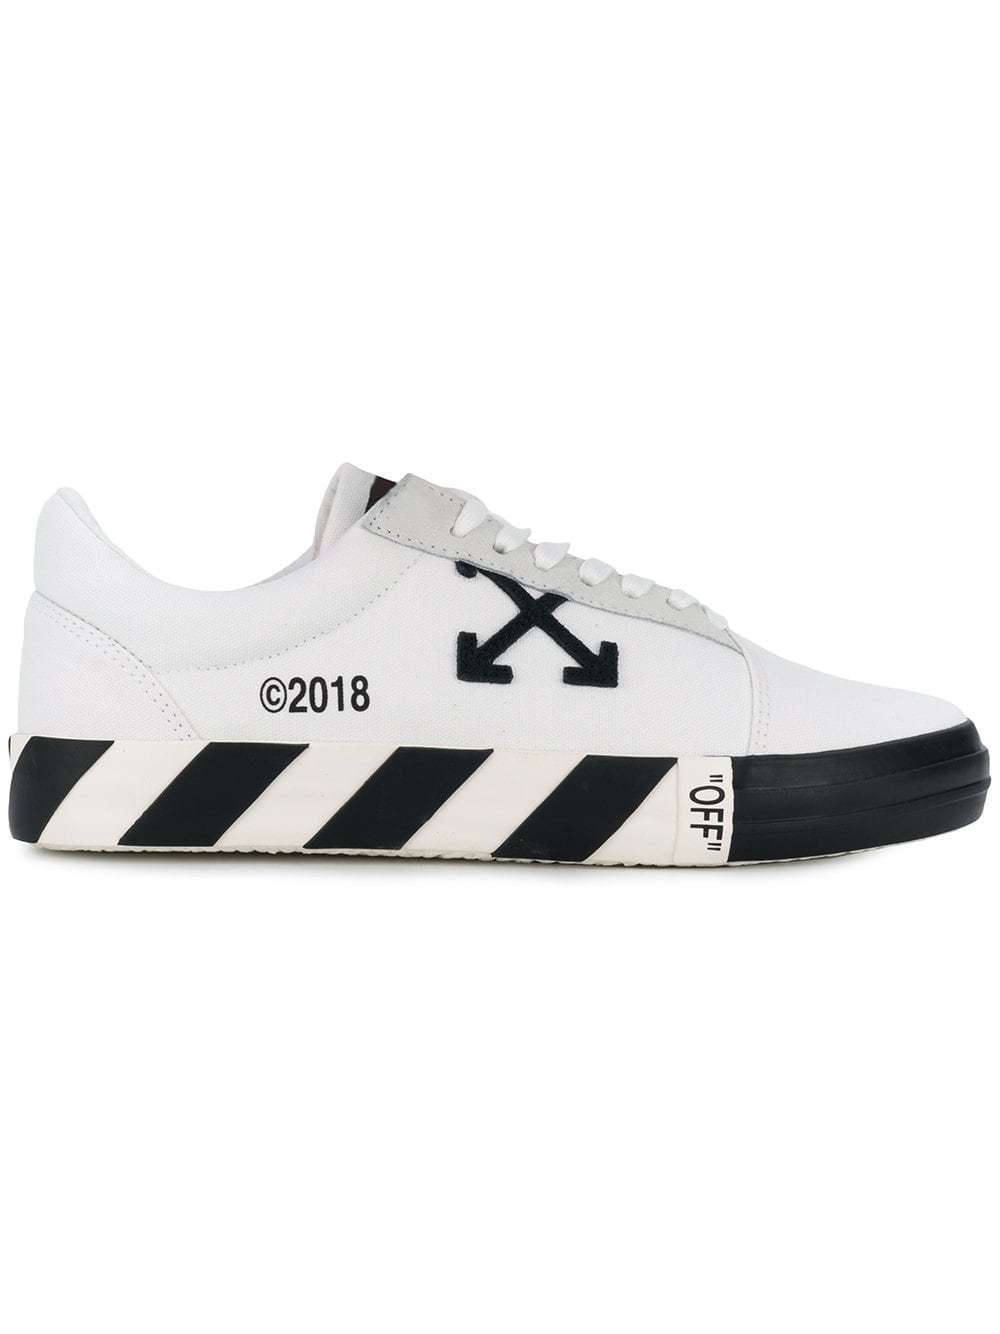 Descent festspil Pind Off-White Vulc Low Top Sneakers, $456 | farfetch.com | Lookastic